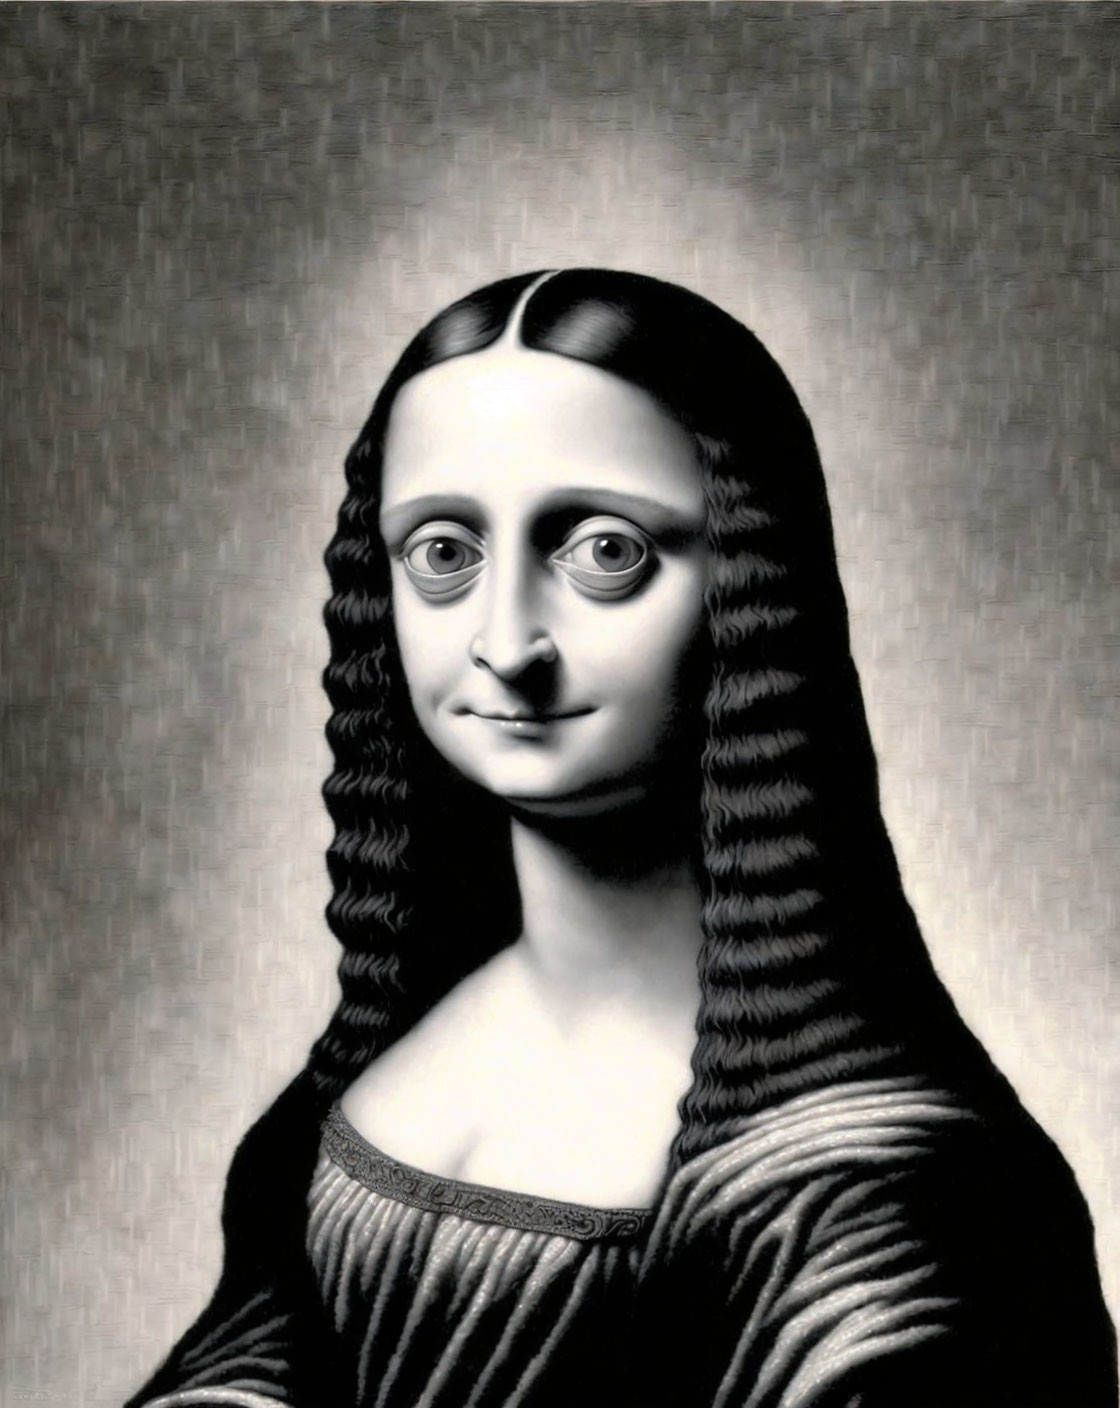 Stylized Mona Lisa with exaggerated smile and flowing hair